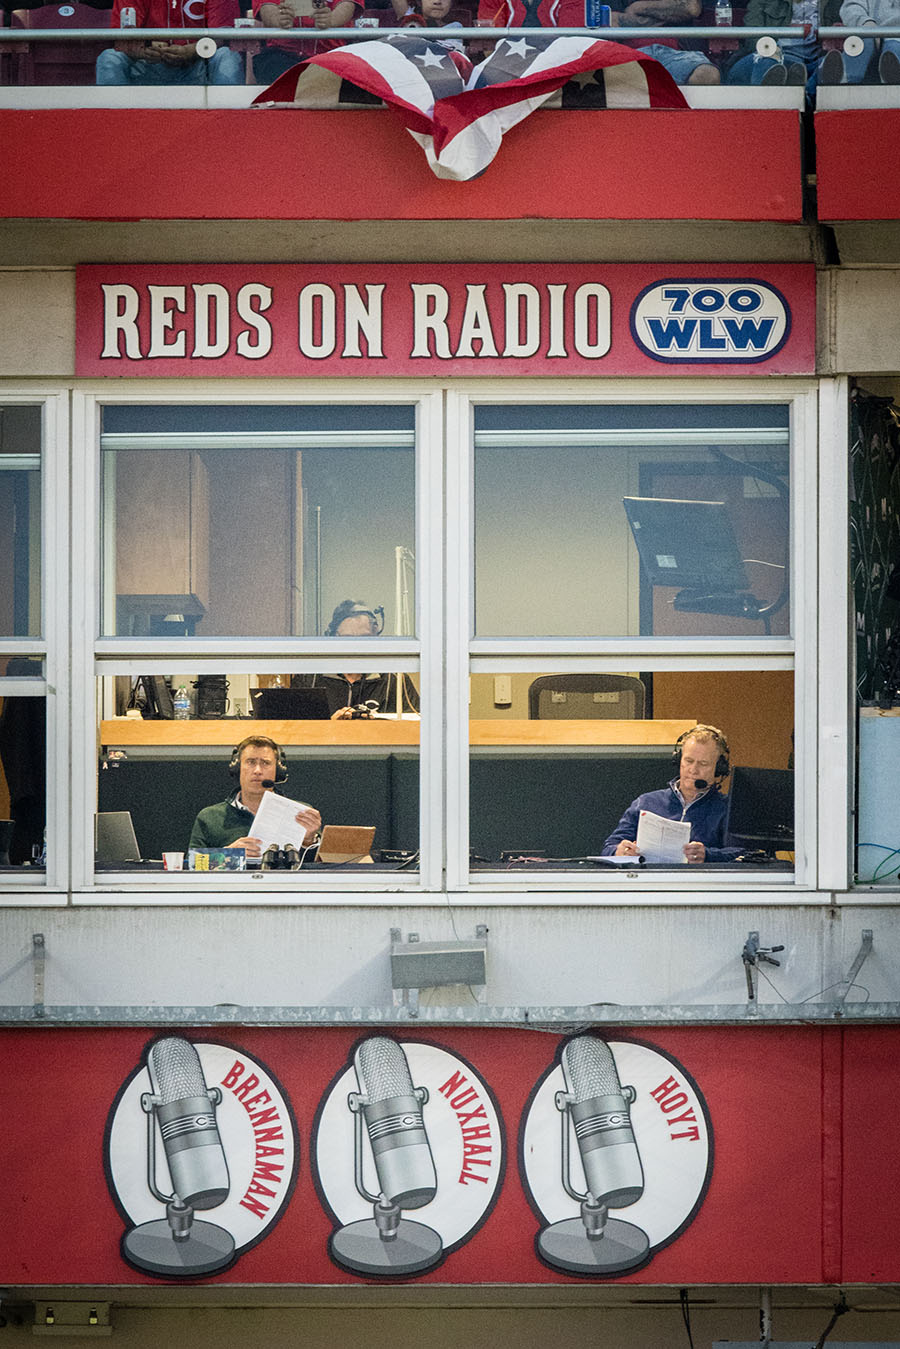 Partnered with former Major League pitcher Jeff Brantley (above on right), Tommy Thrall occupies the radio booth for a storied baseball franchise whose previous play-by-play announcers include Marty Brennaman, Joe Nuxhall and Waite Hoyt. 